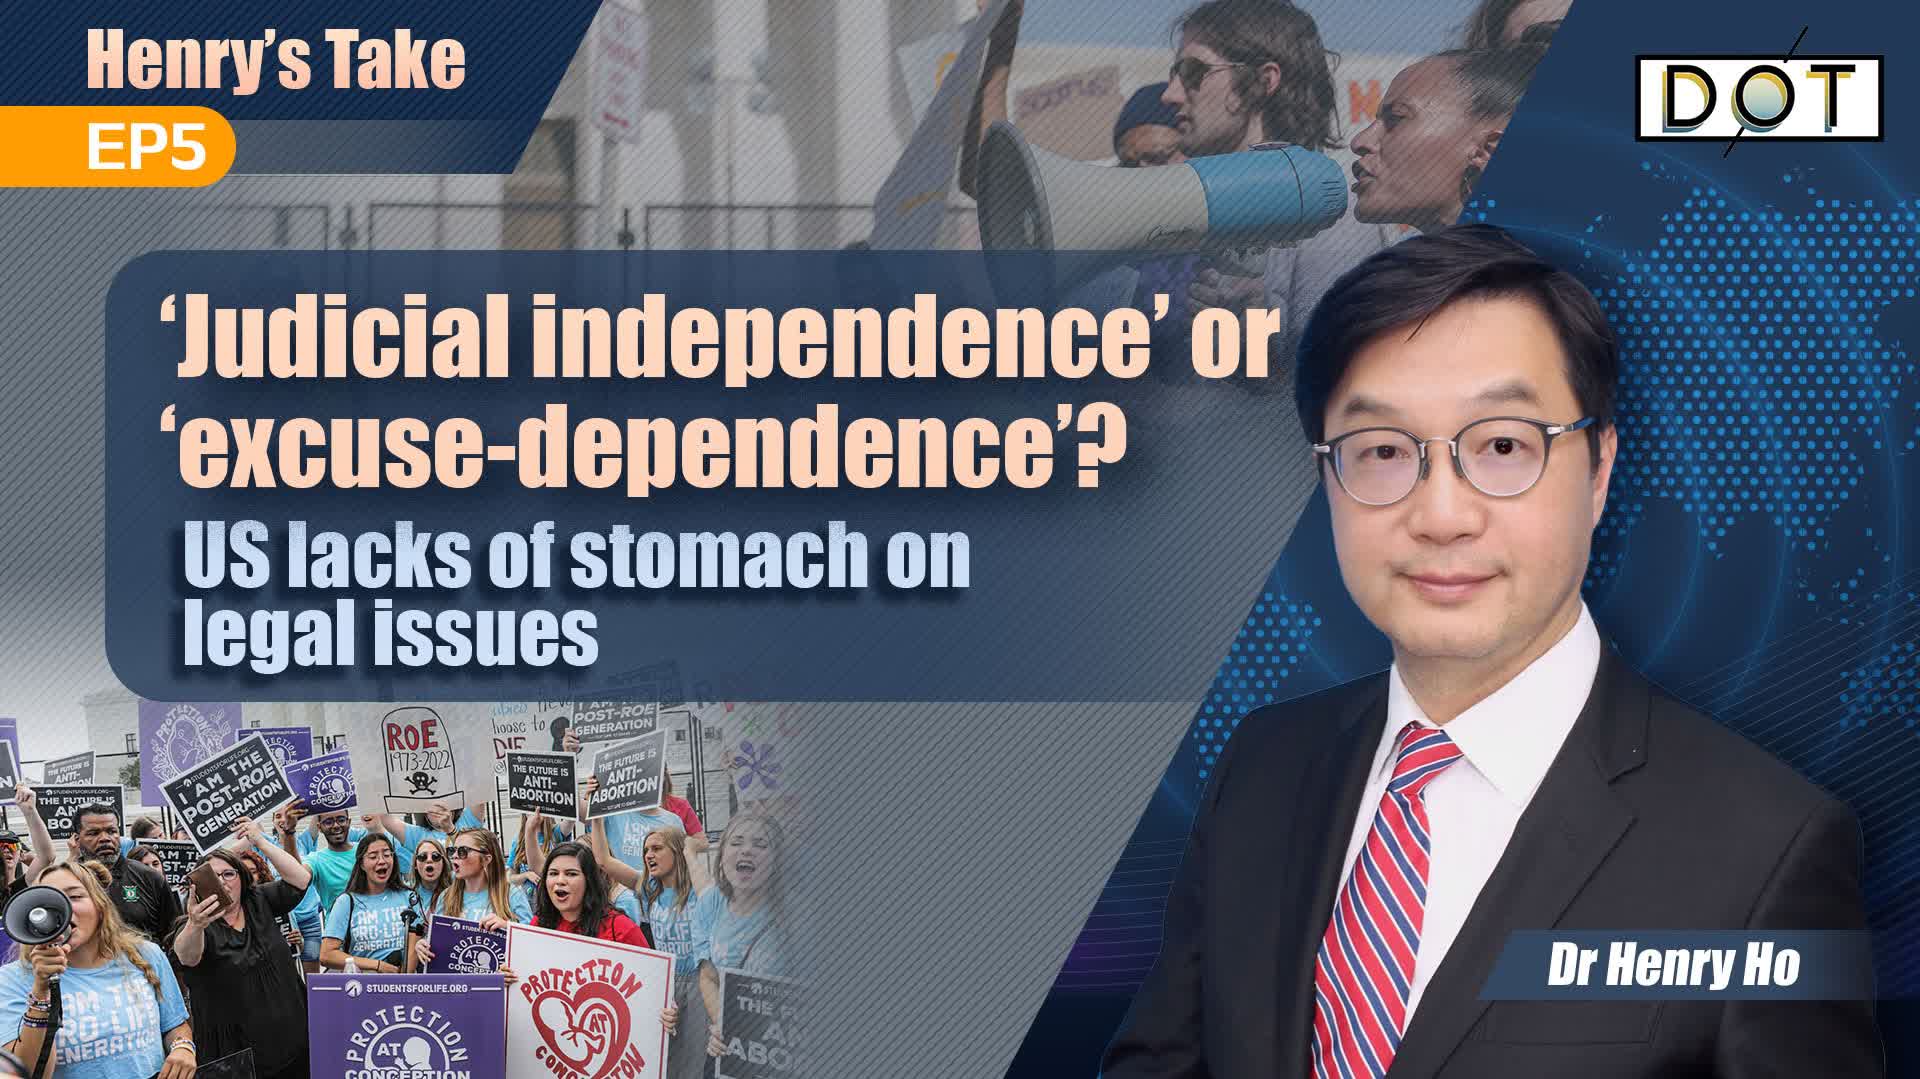 Henry's Take EP5 | 'Judicial independence' or 'excuse-dependence'? US lacks of stomach on legal issues